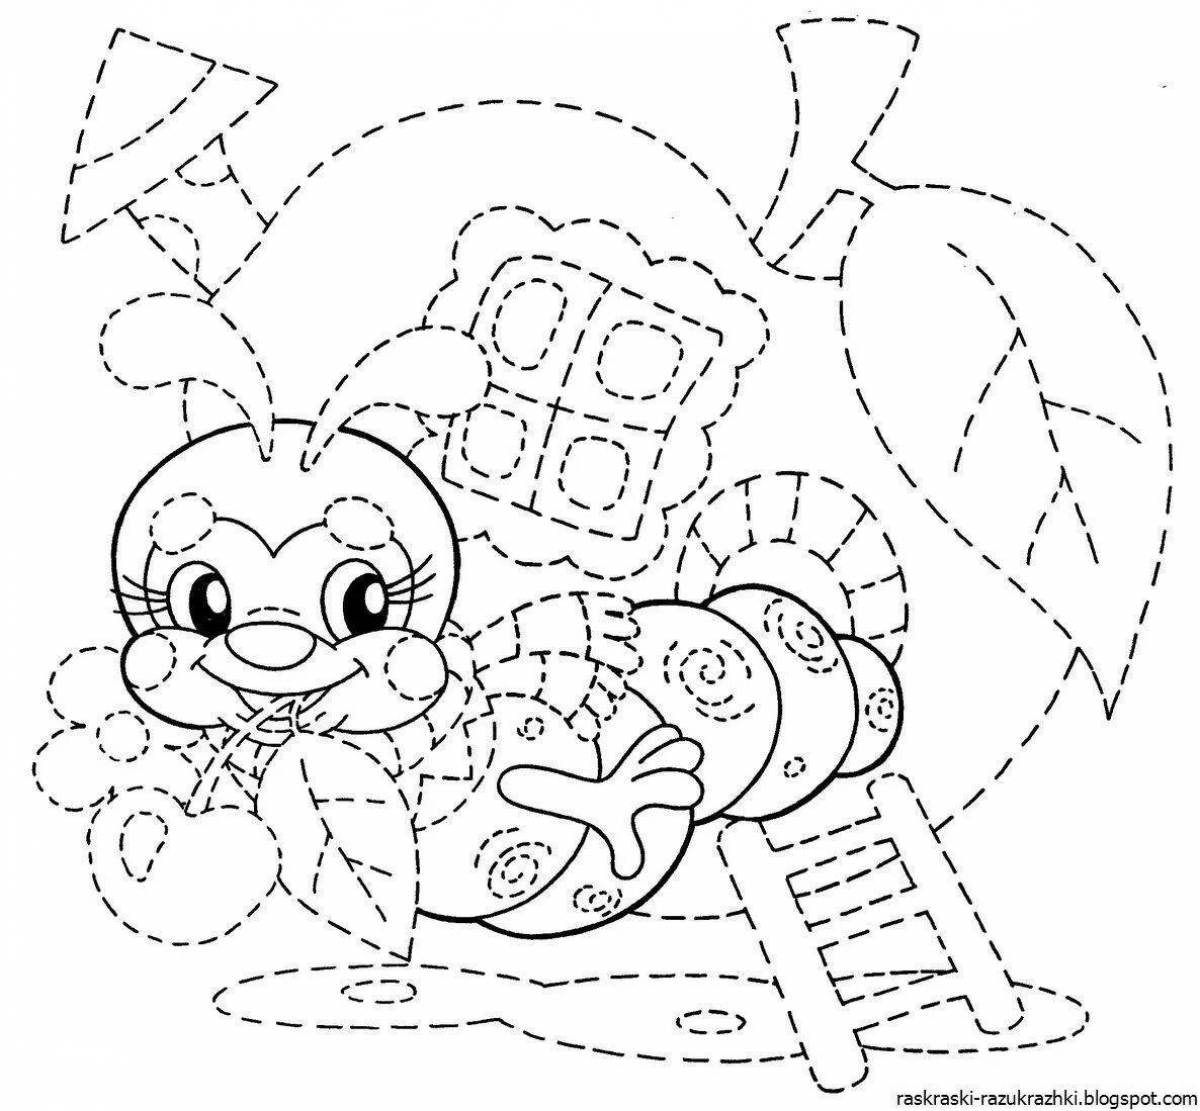 Adorable old people coloring book